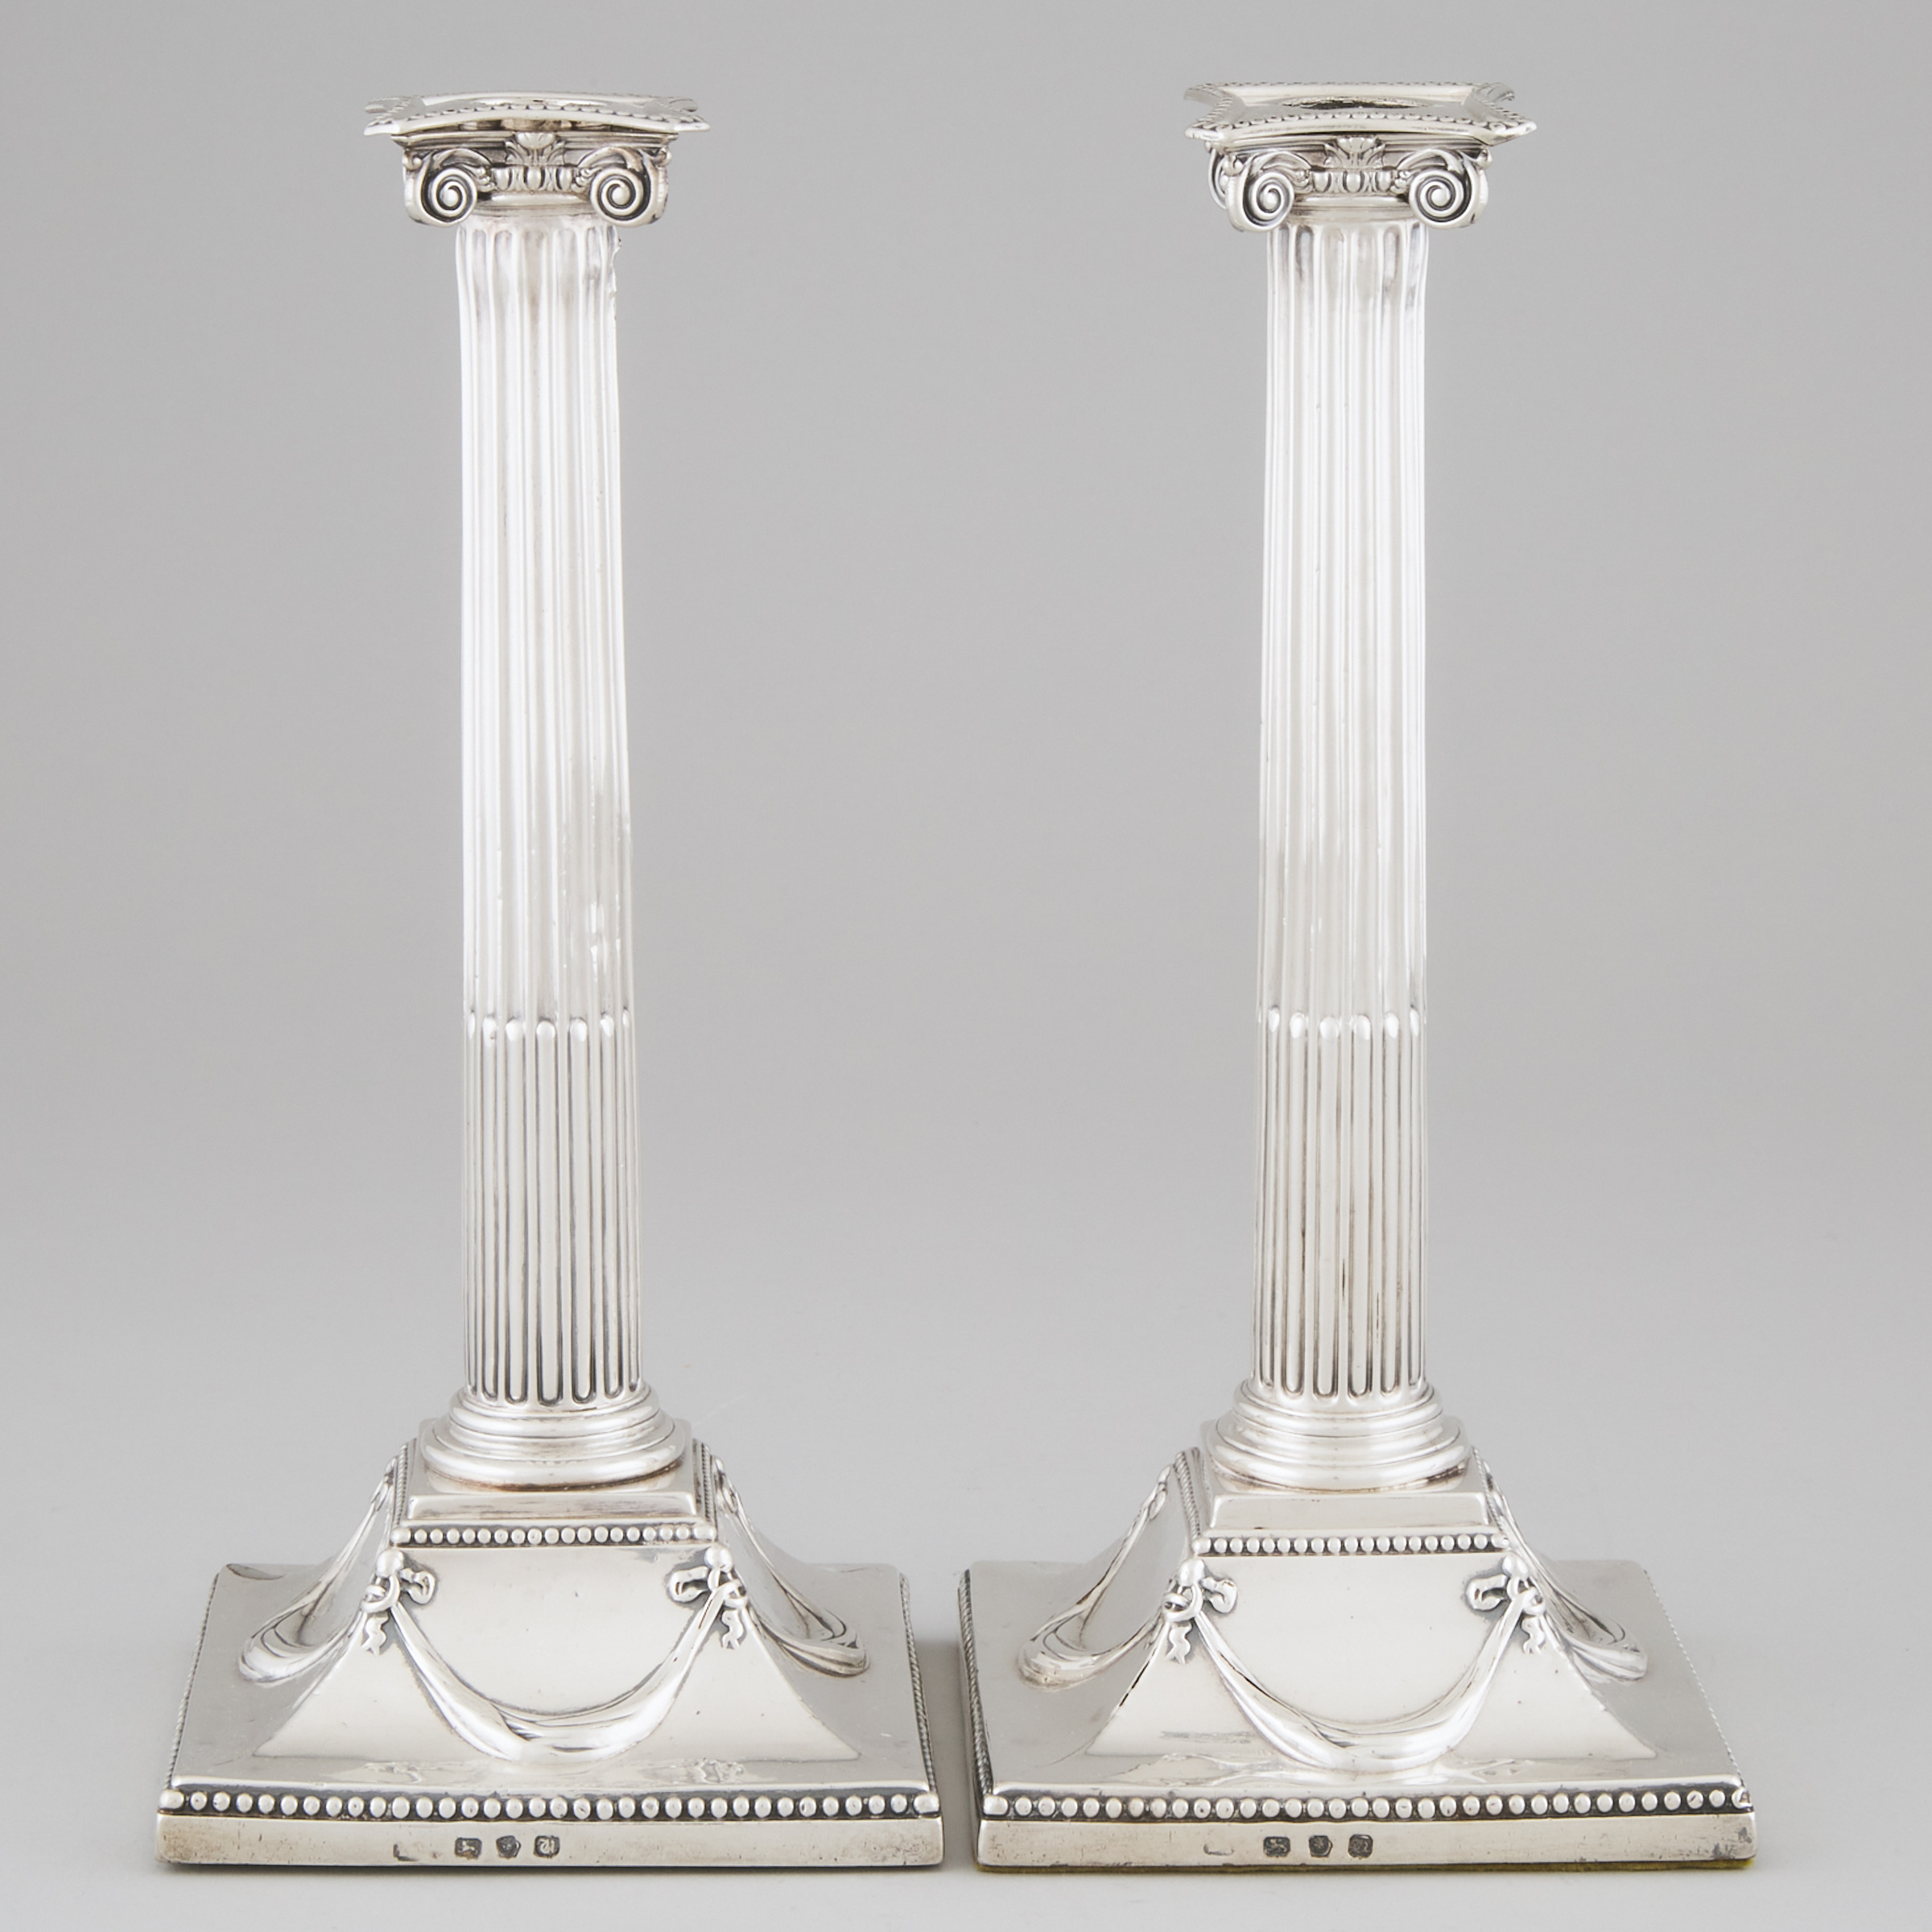 Pair of George III Silver Table Candlesticks, probably John Carter II, London, 1775